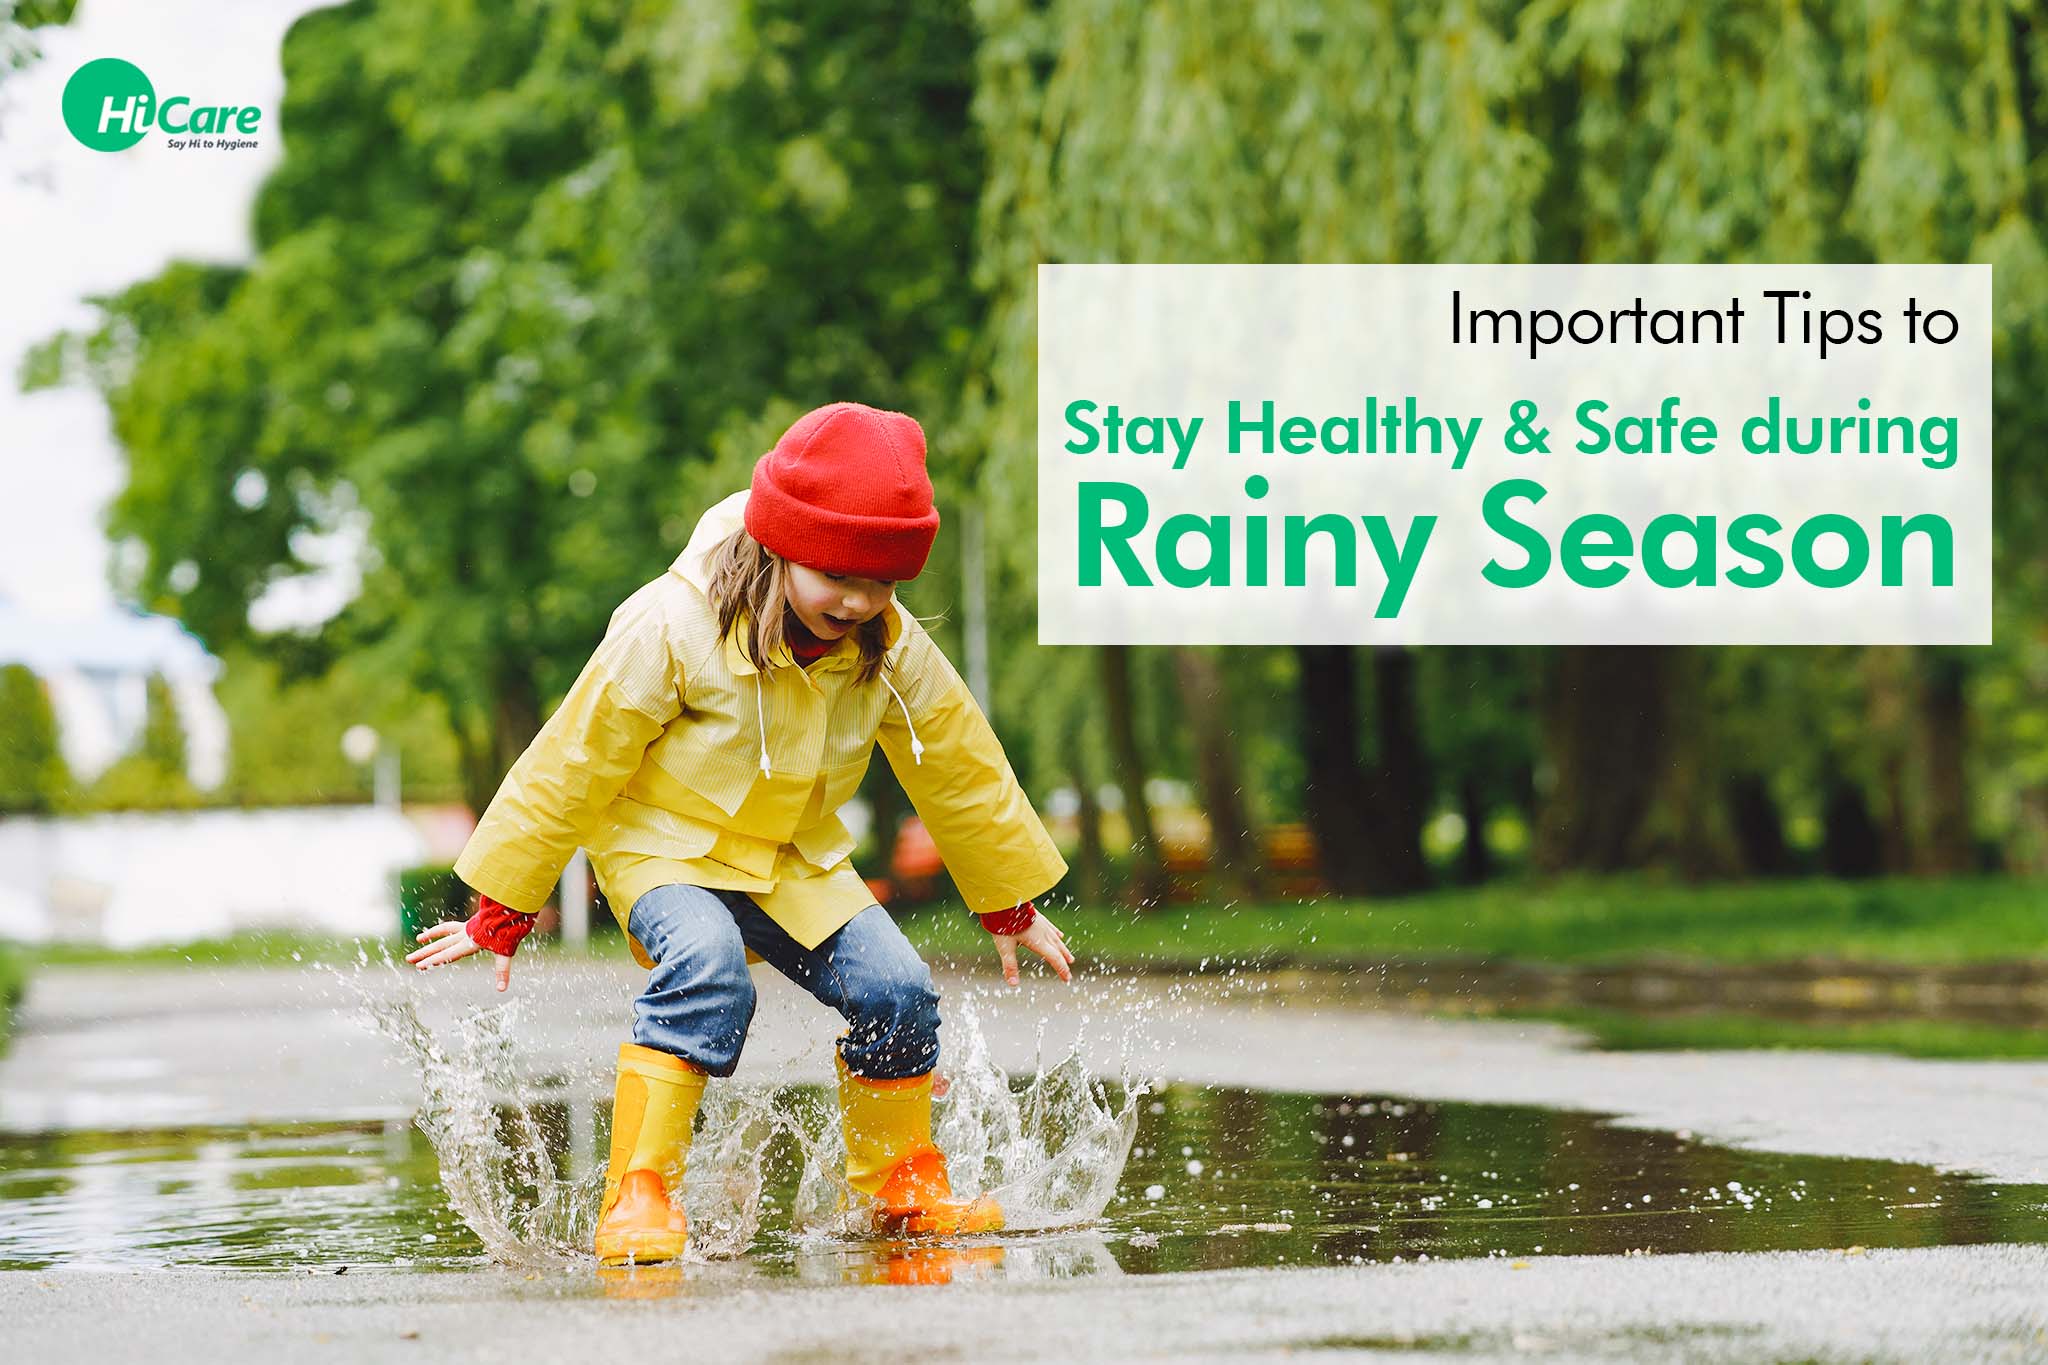 Top 10 Health Care Tips to Stay Healthy in Rainy Season